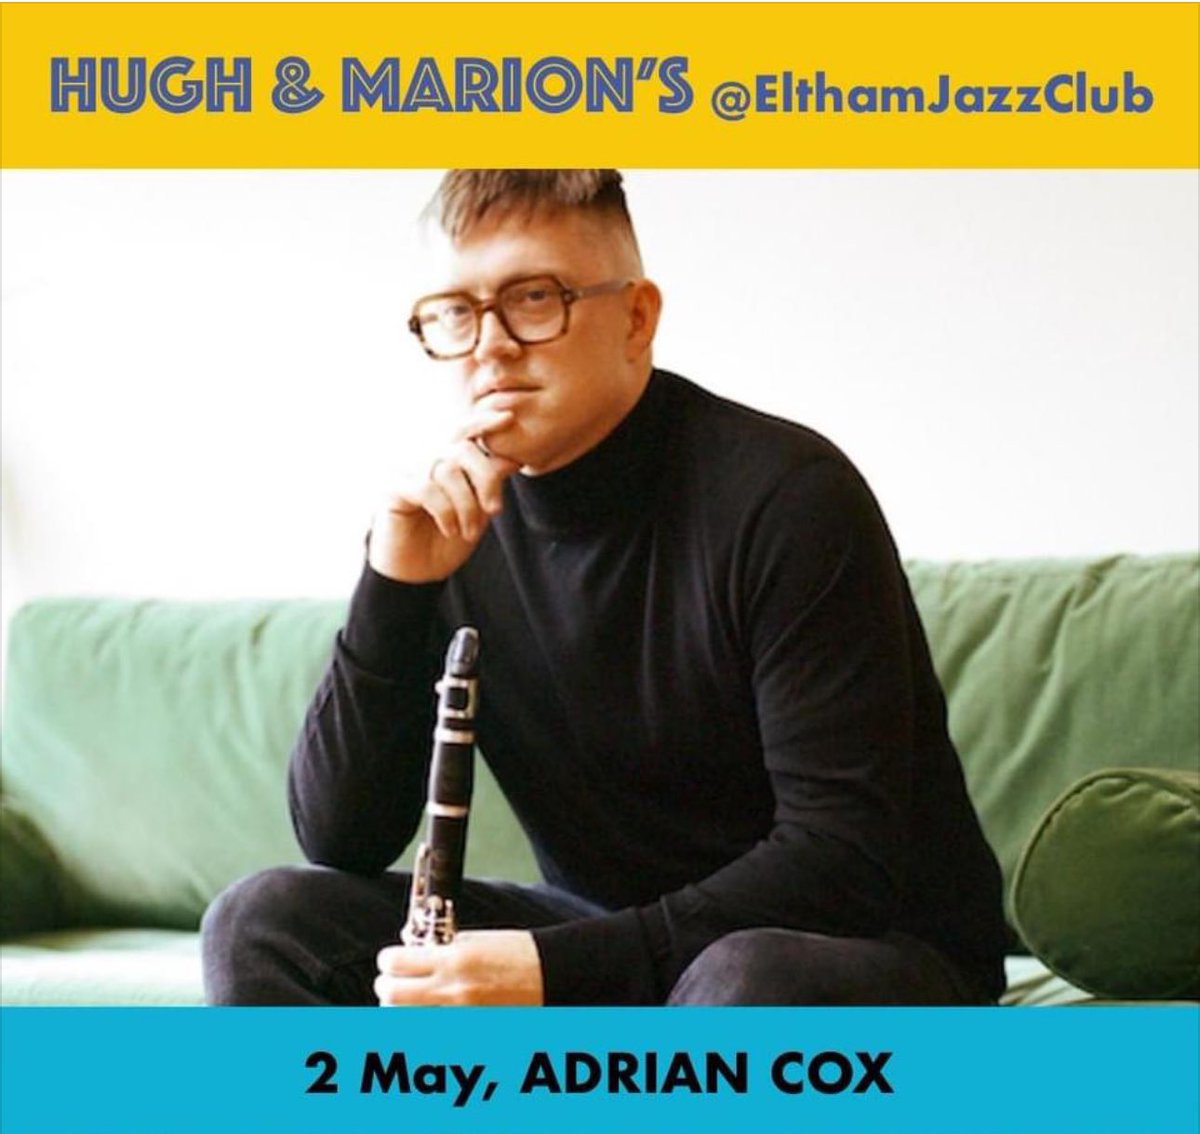 Super excited to be heading to @ElthamJazzClub on May 2nd They have such a great program! Playing with Dave Archer, Simon Read & Dave Ohm! Putting together the music for the show and it’s already swinging 🔥 Tickets: elthamjazzclub.com/event/adrian-c… See you there ❤️